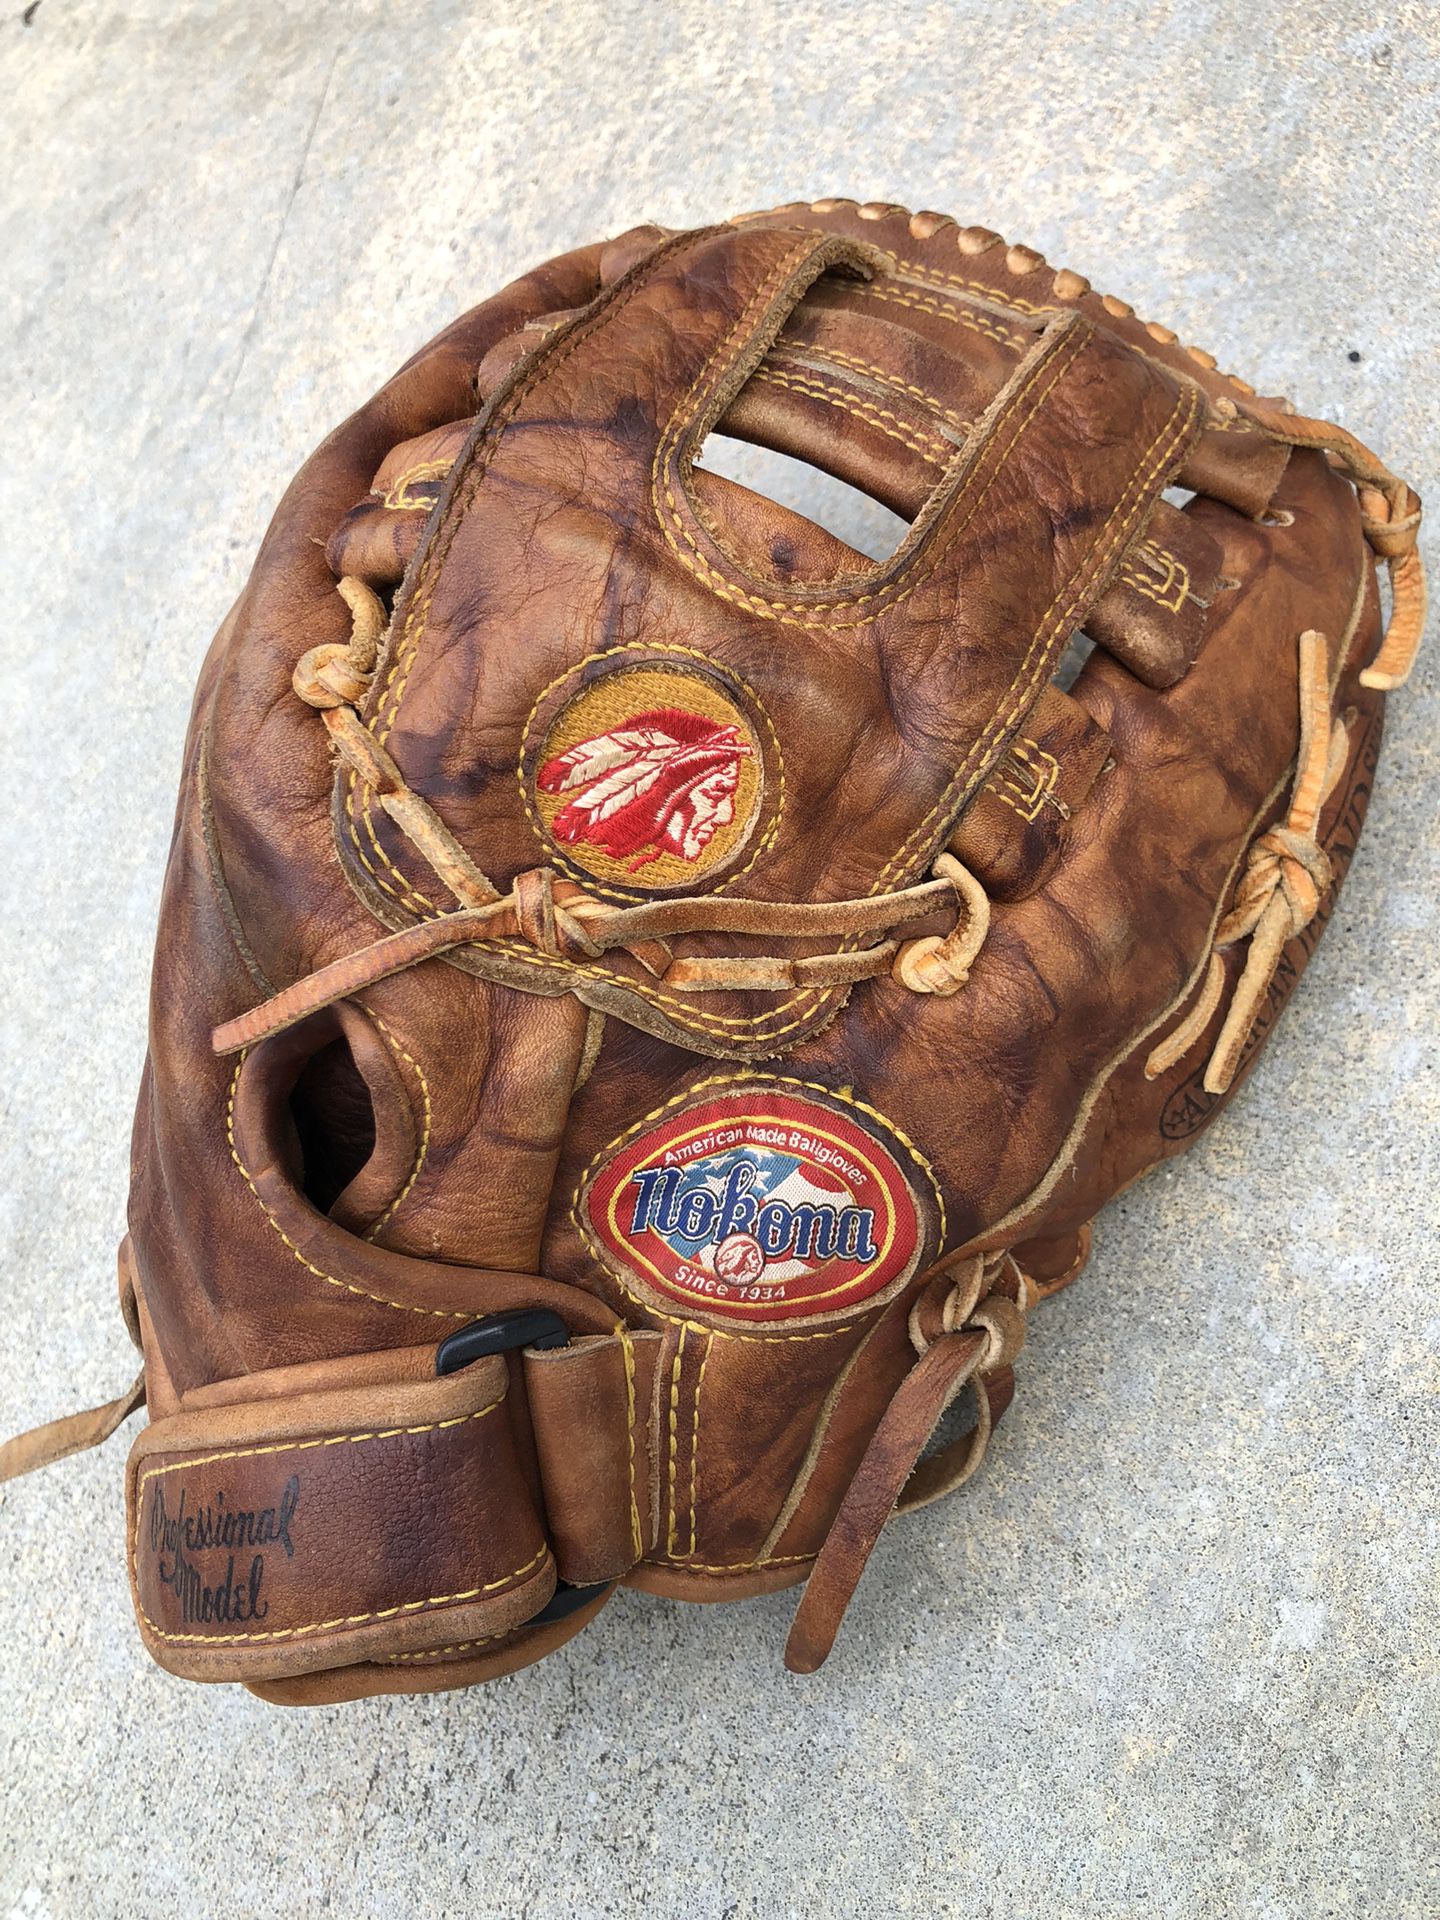 Nokona Profesional Model Baseball Softball Glove In Excellent Condition Have More Baseball And Softball Equipment Available $140 firm